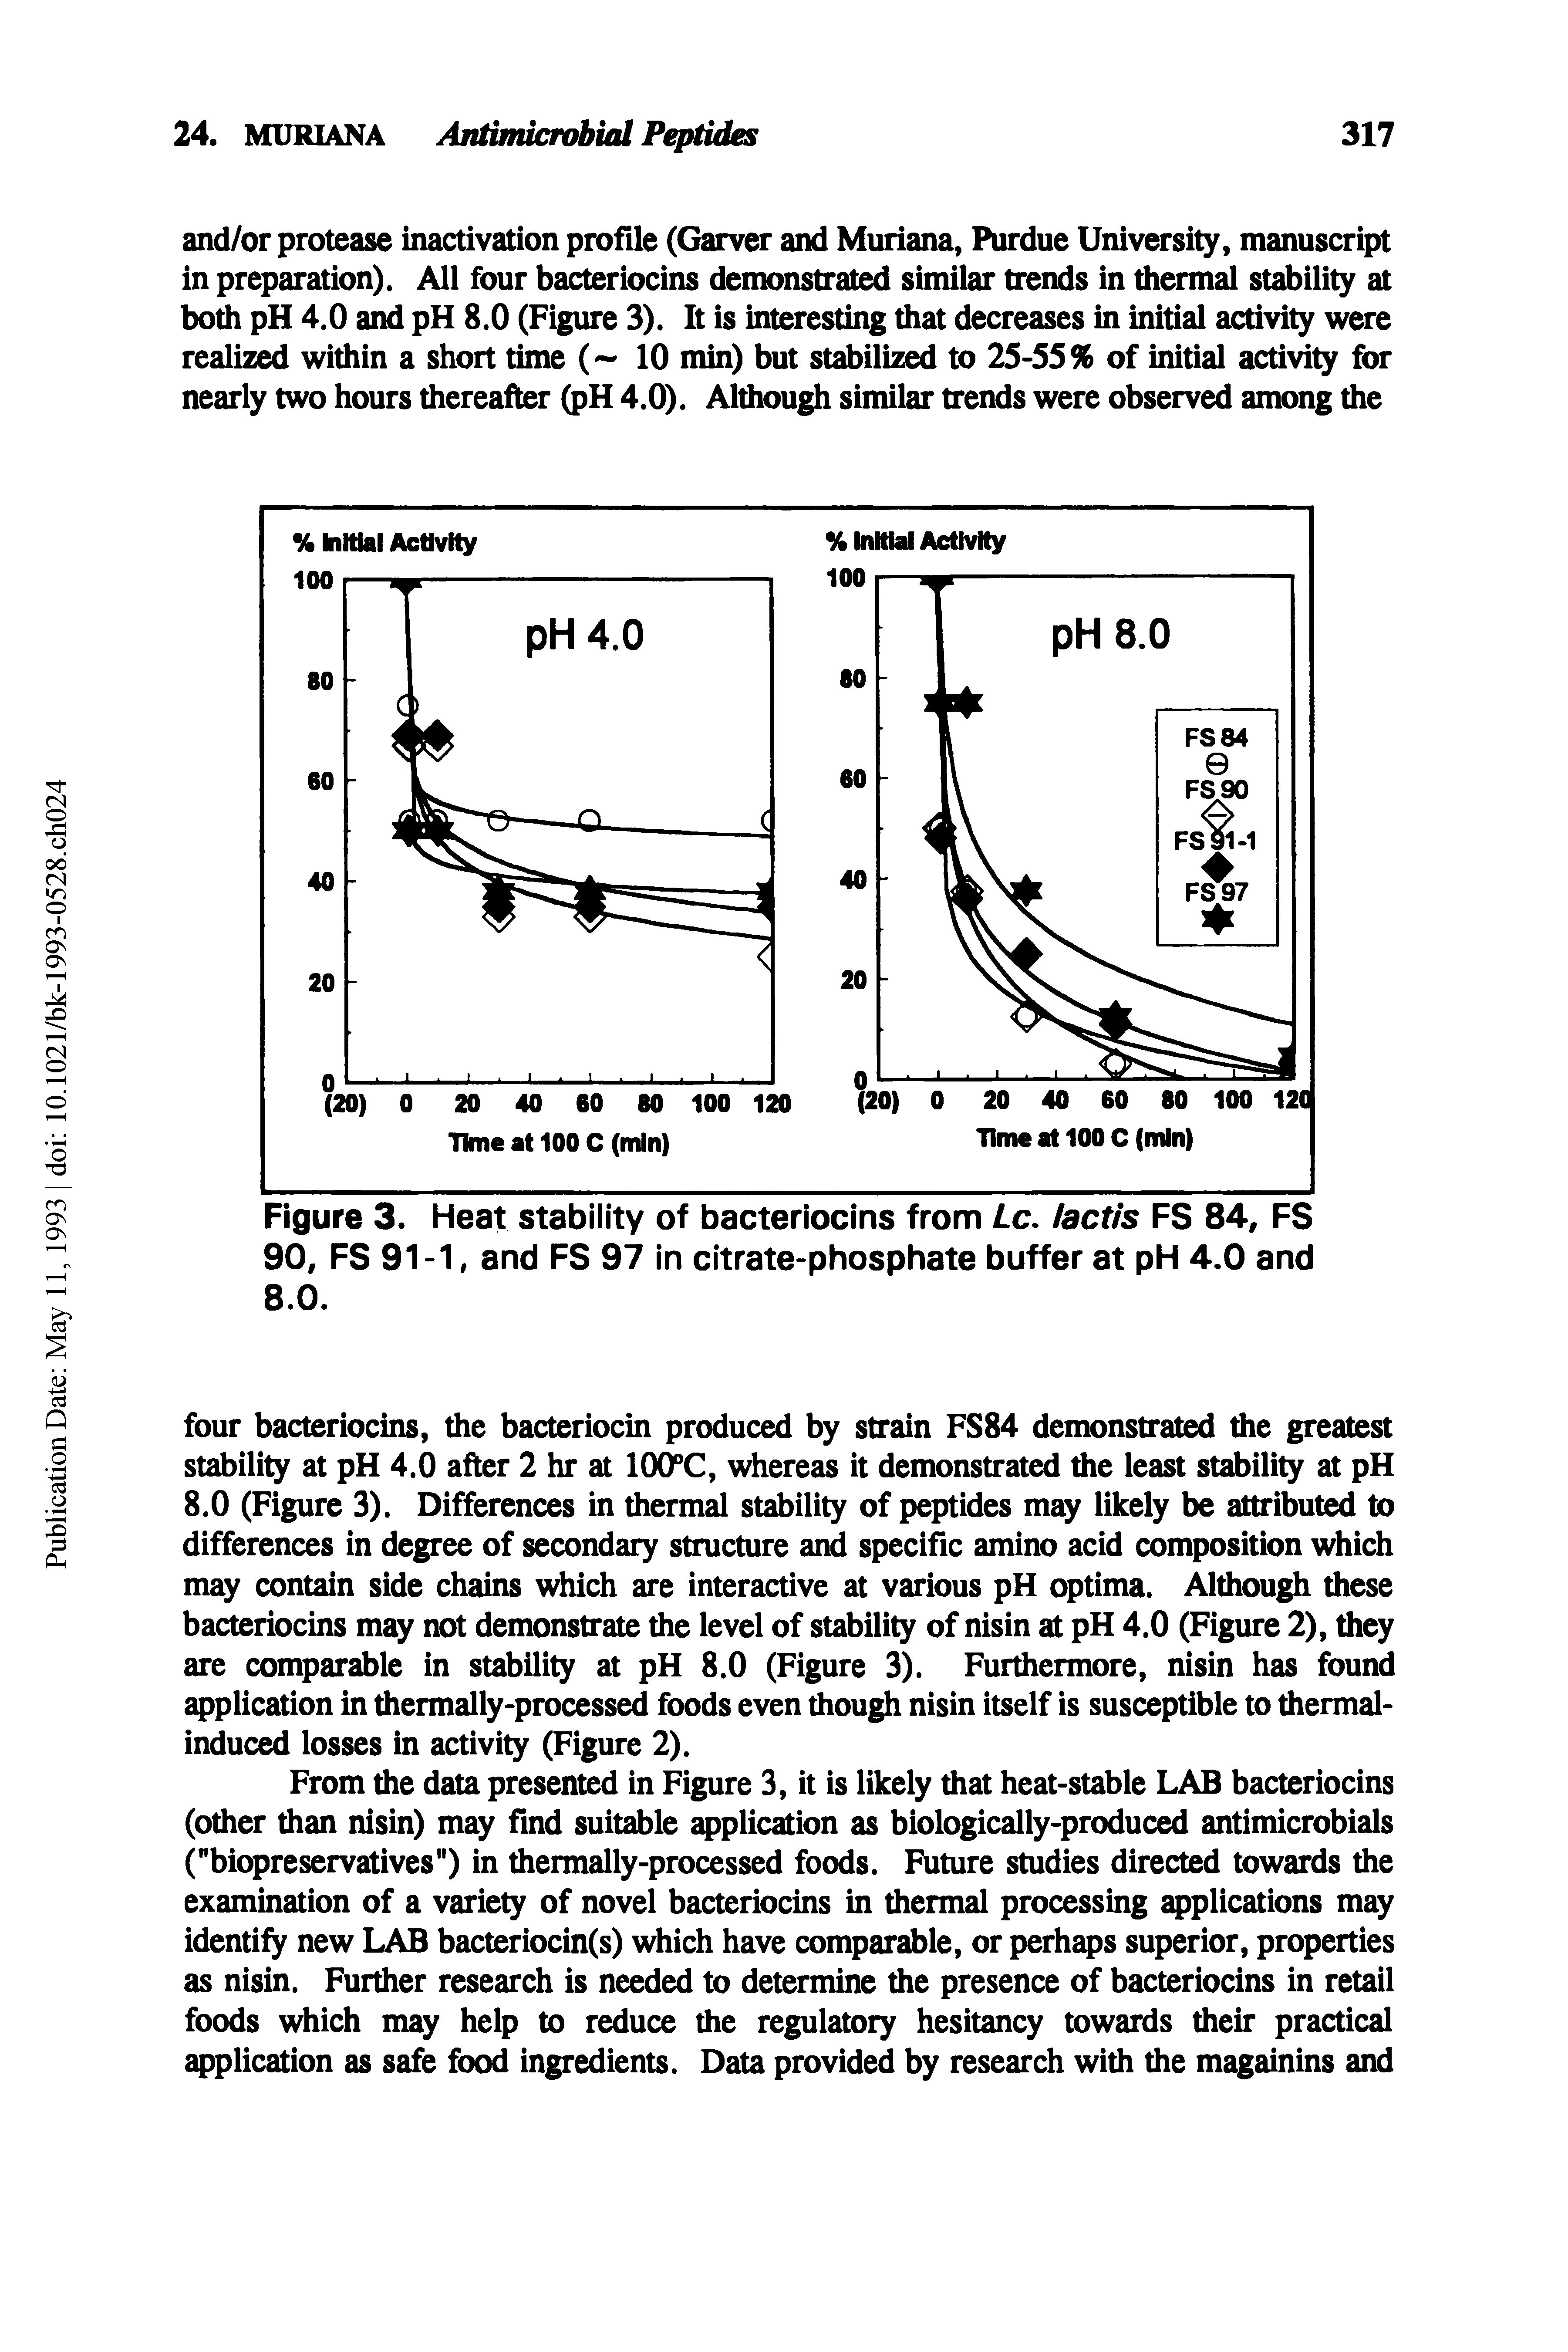 Figure 3. Heat stability of bacteriocins from Lc, lactis FS 84, FS 90, FS 91-1, and FS 97 In citrate-phosphate buffer at pH 4.0 and 8.0.